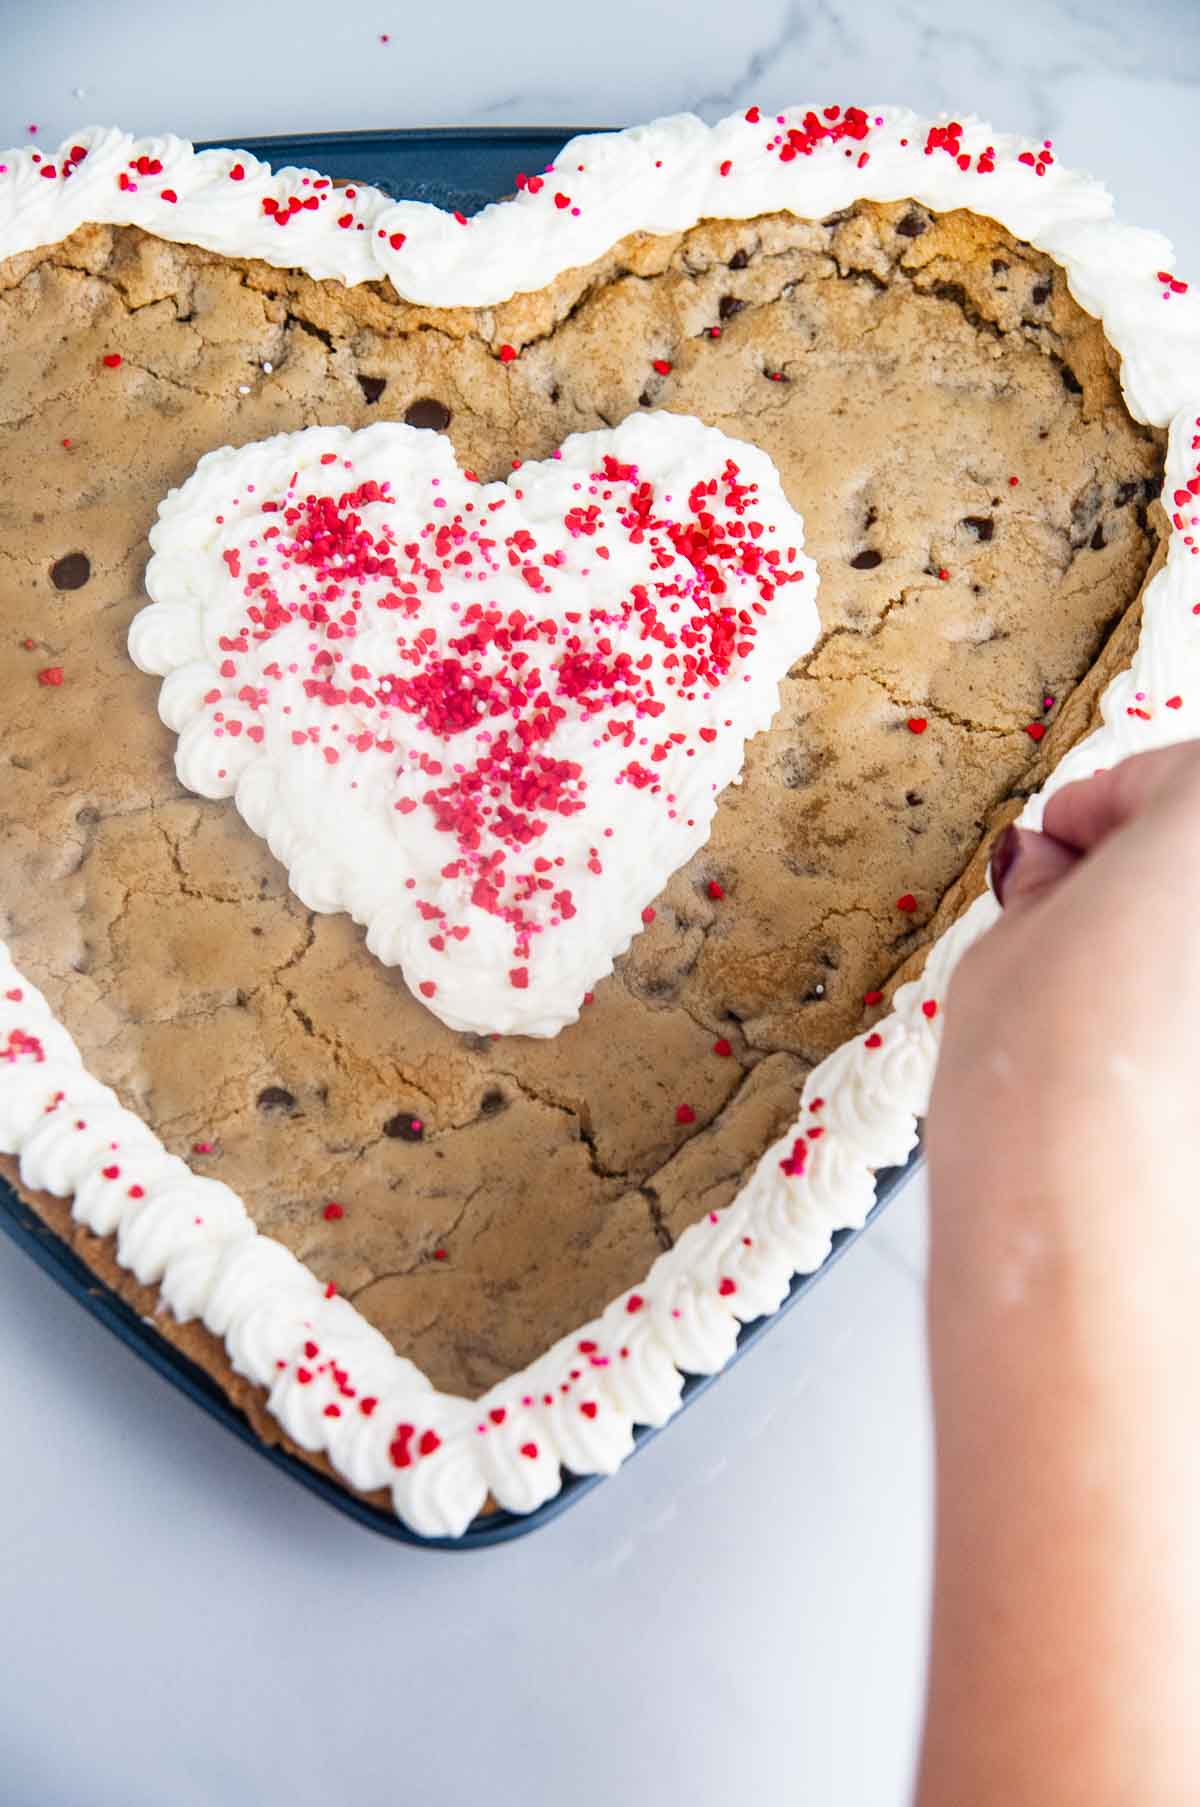 Decorate the giant heart cookie cake with buttercream and sprinkles!